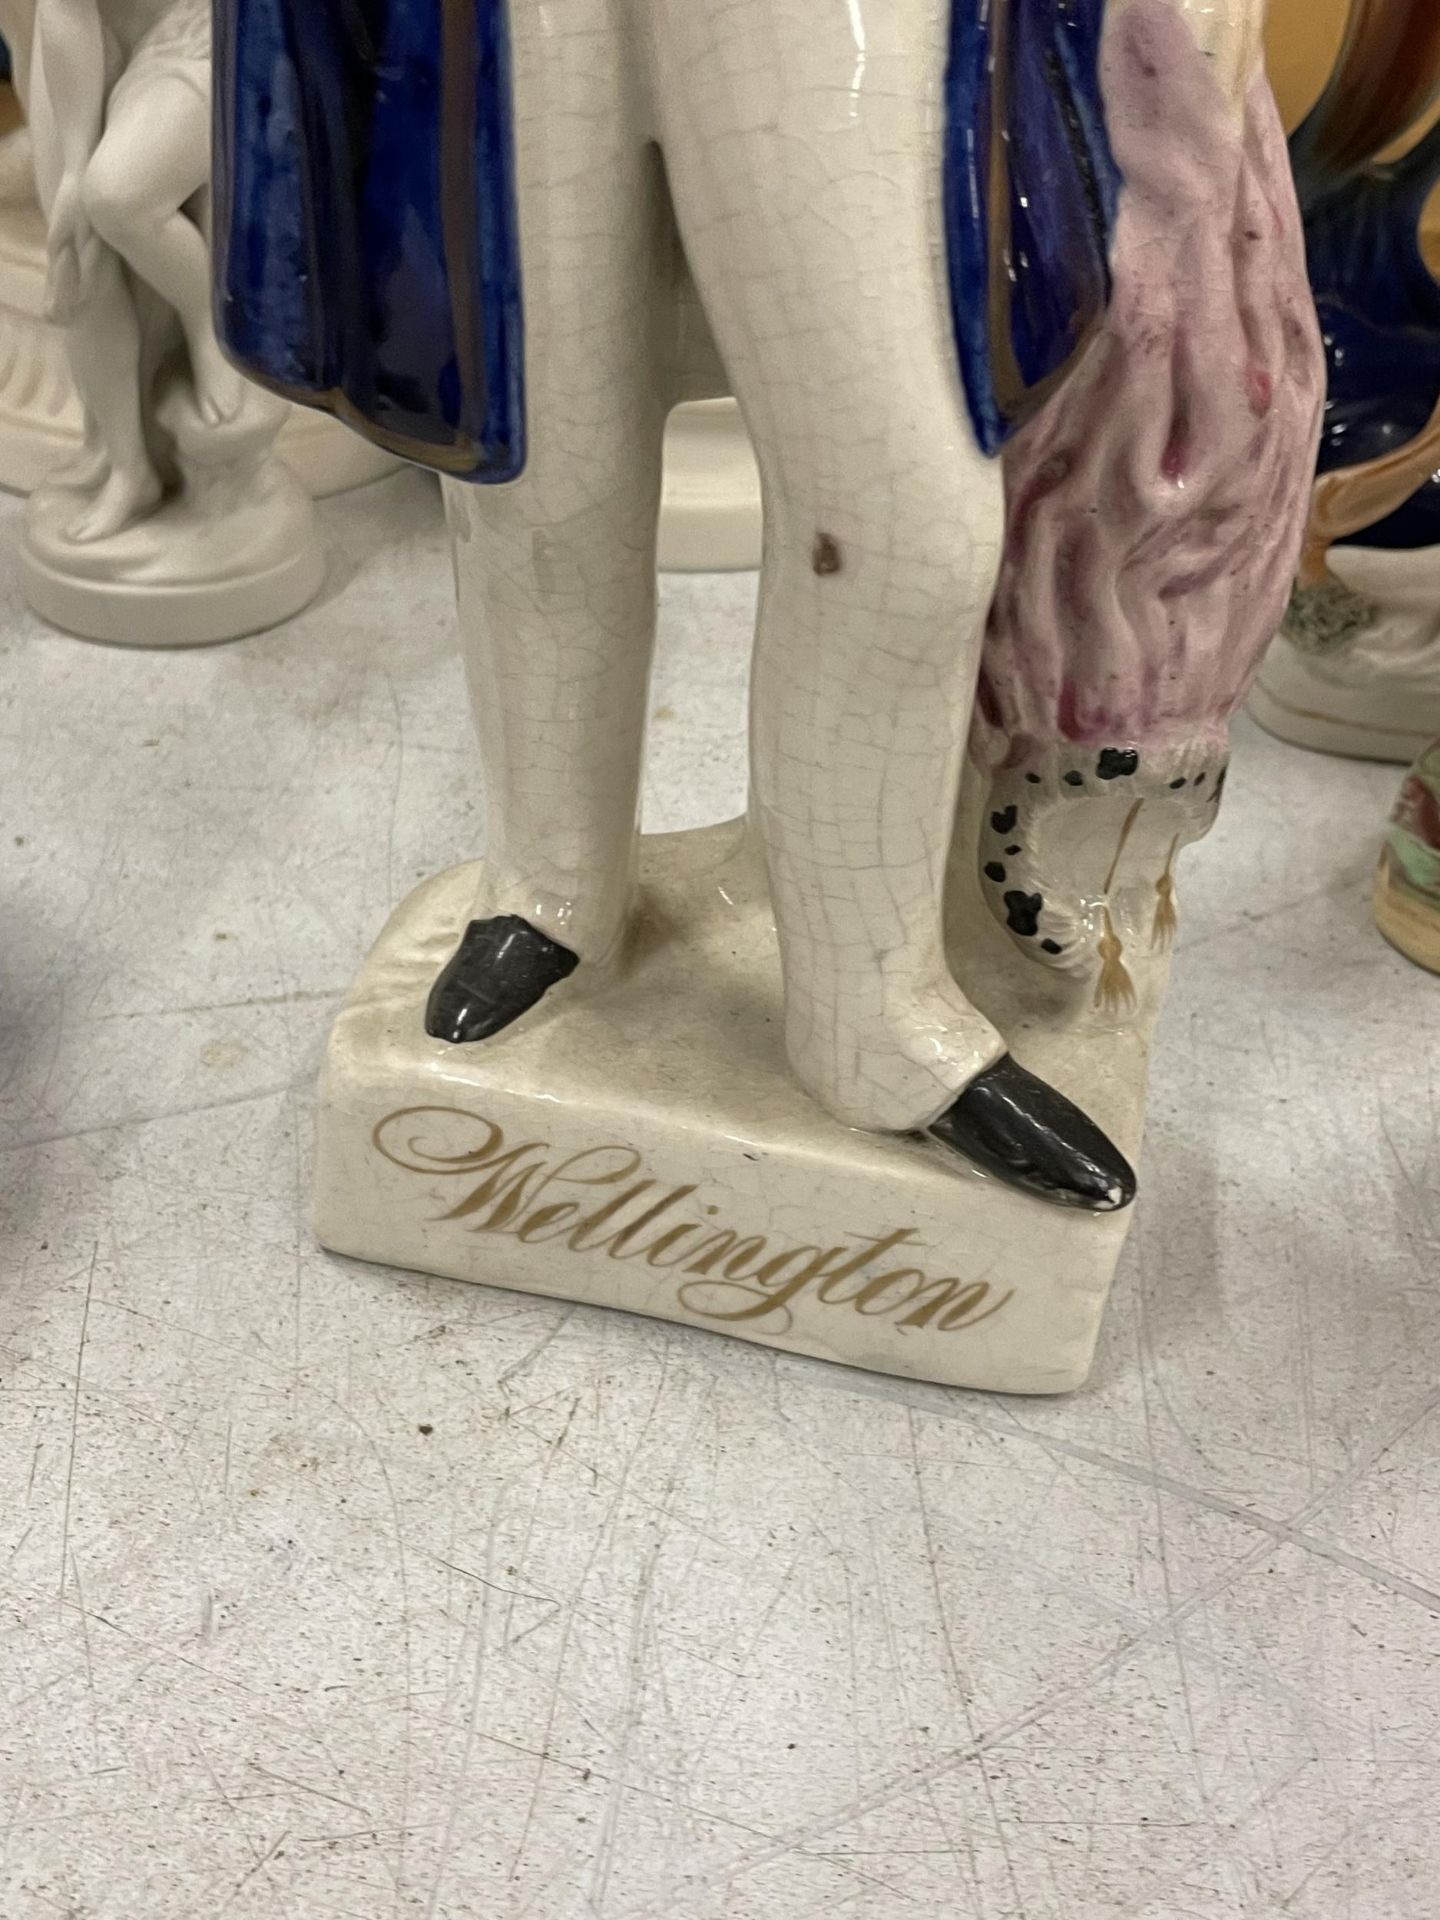 A MID 19TH CENTURY STAFFORDSHIRE POTTERY MODEL OF WELLINGTON - Image 2 of 4